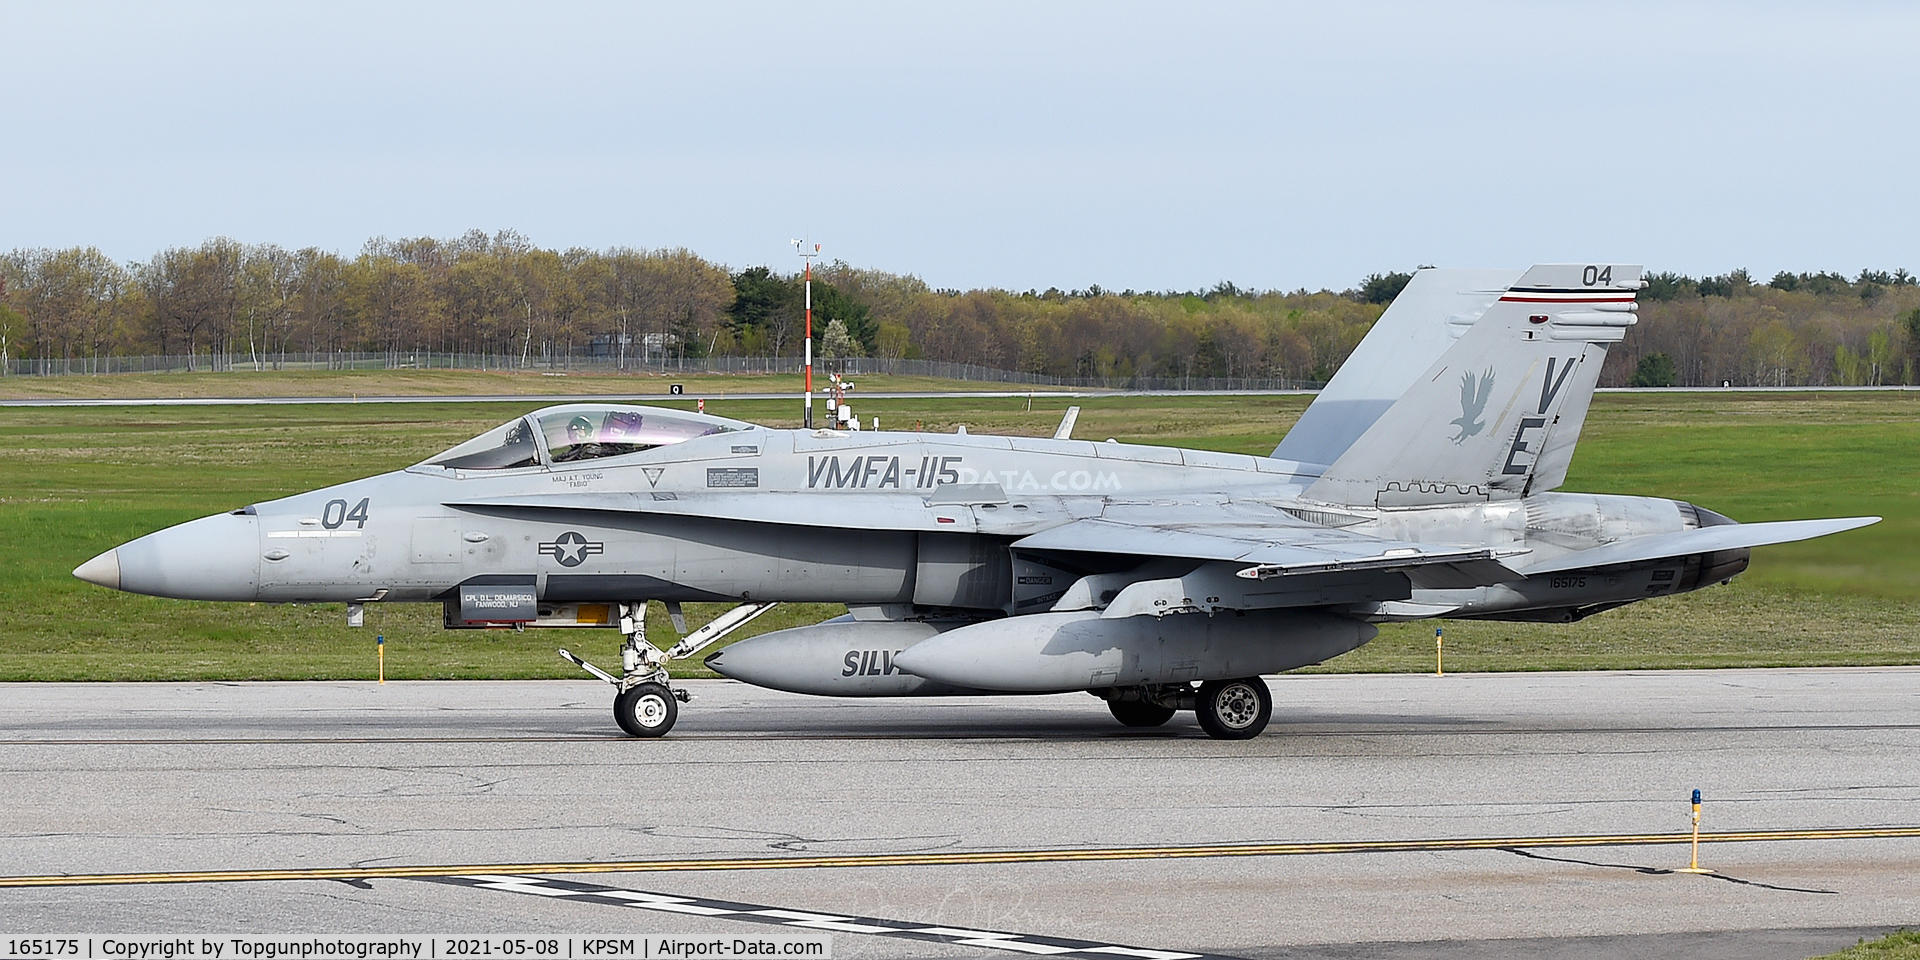 165175, McDonnell Douglas F/A-18C Hornet C/N 1295/C400, VMFA-115 Screaming Eagles
BLADE11 taxing to RW34